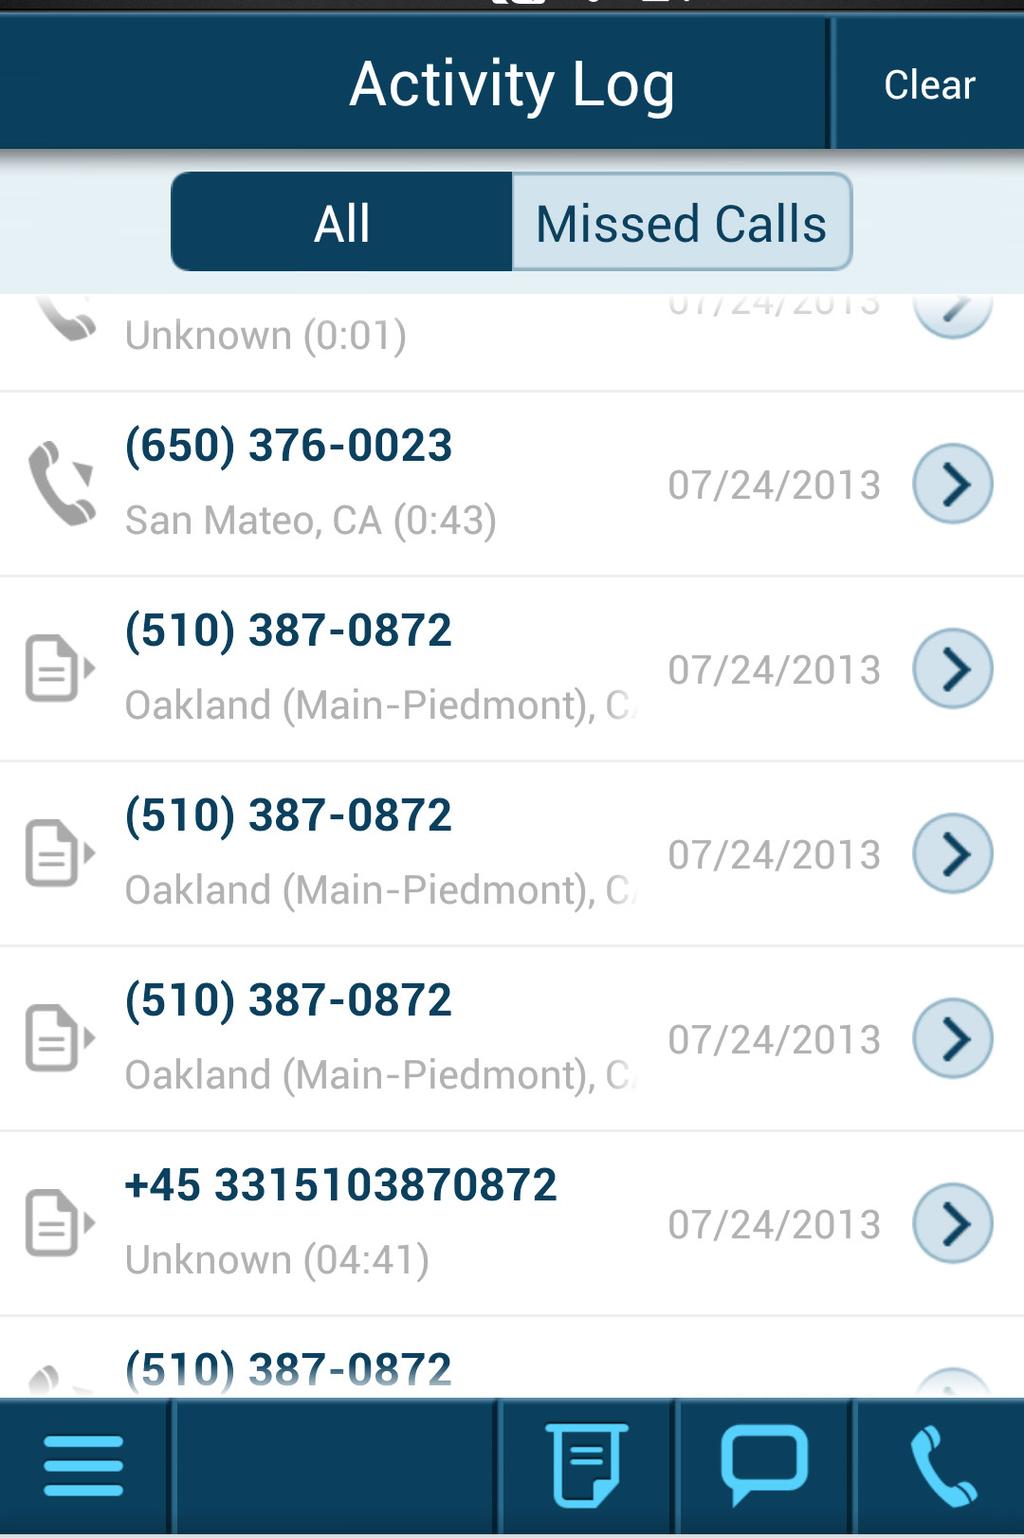 RingCentral Office@Hand from AT&T Mobile App User Guide Welcome Call Log The Call Log maintains your call history, including calls you placed, received, and missed.